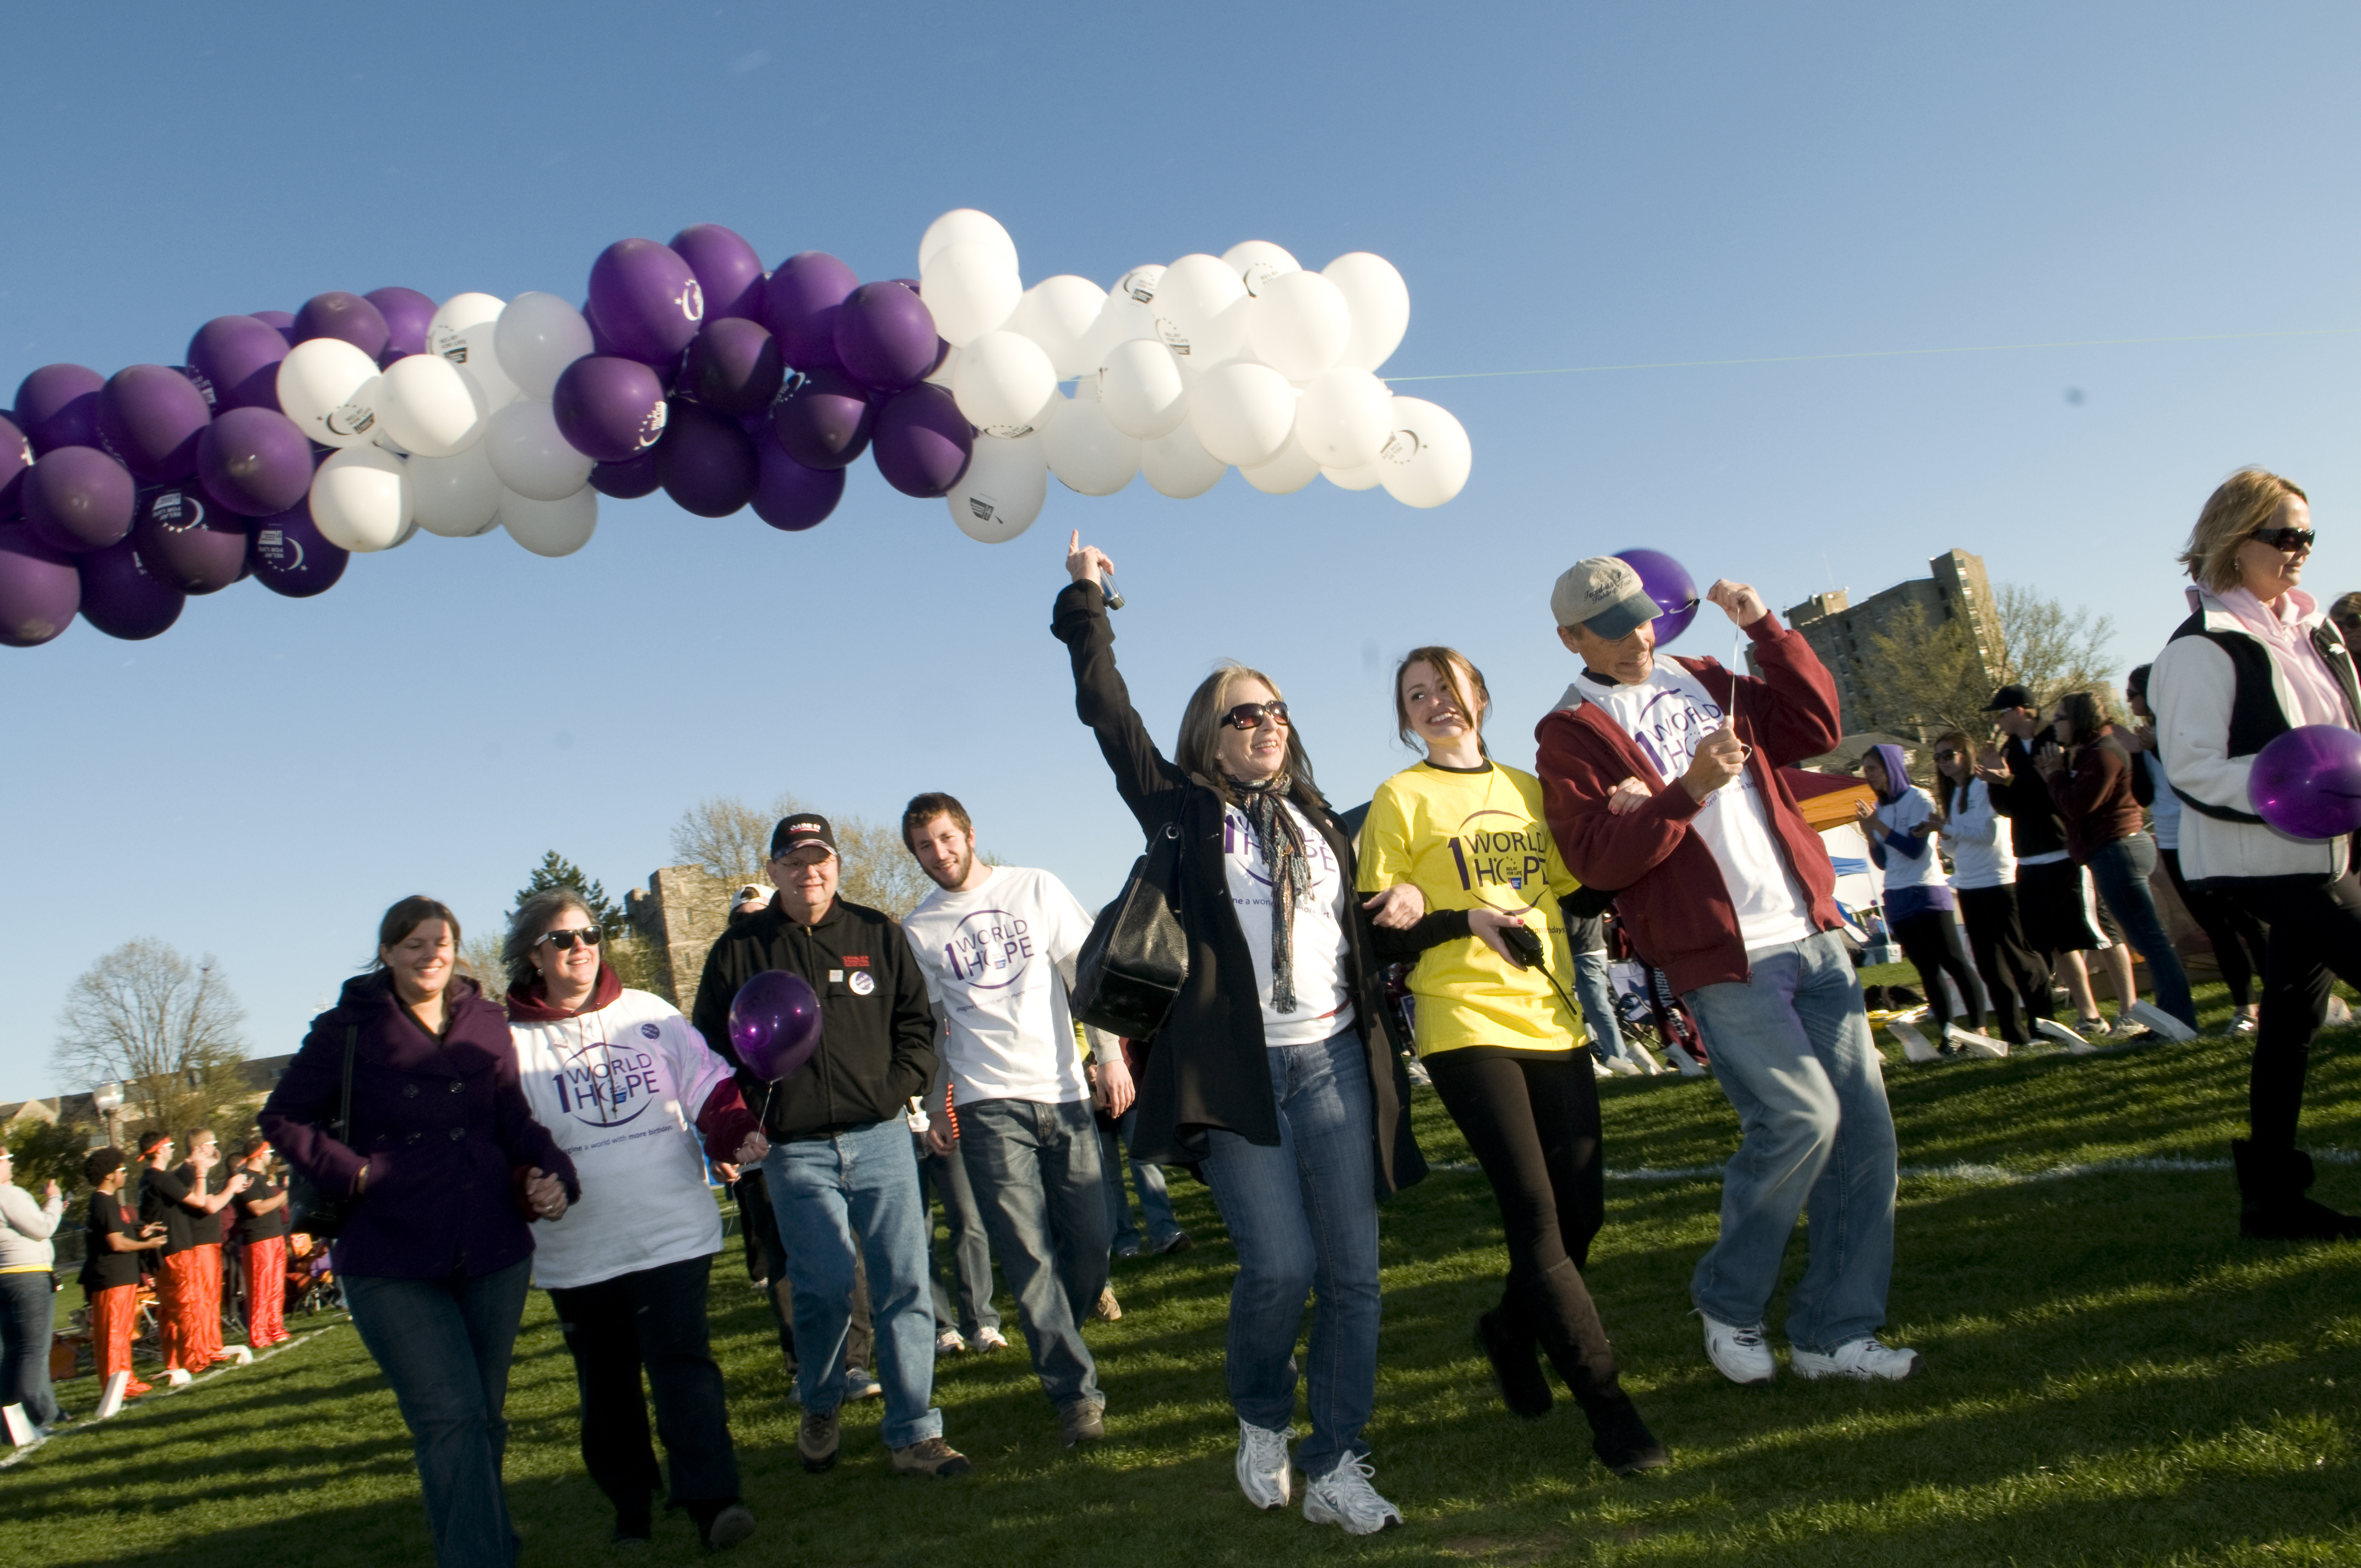 Volunteers participate in the 2010 event on the Drillfield.